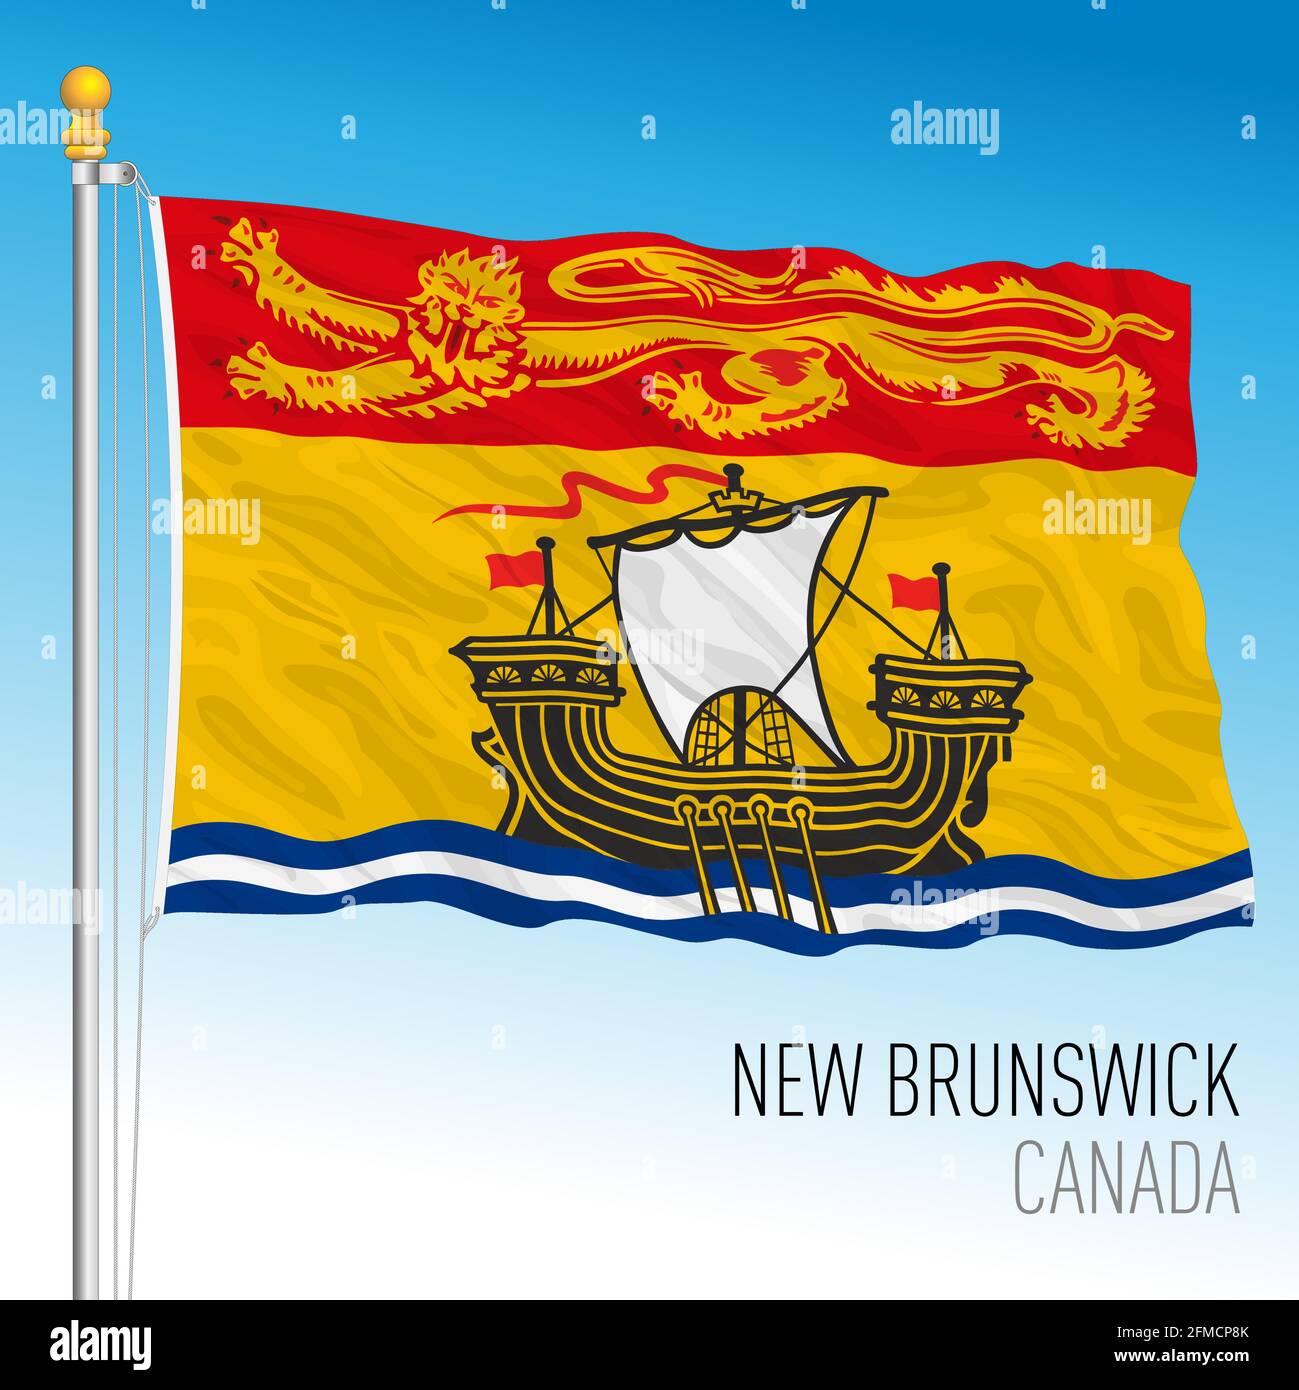 New Brunswick territorial and regional flag, Canada, north american country, vector illustration Stock Vector